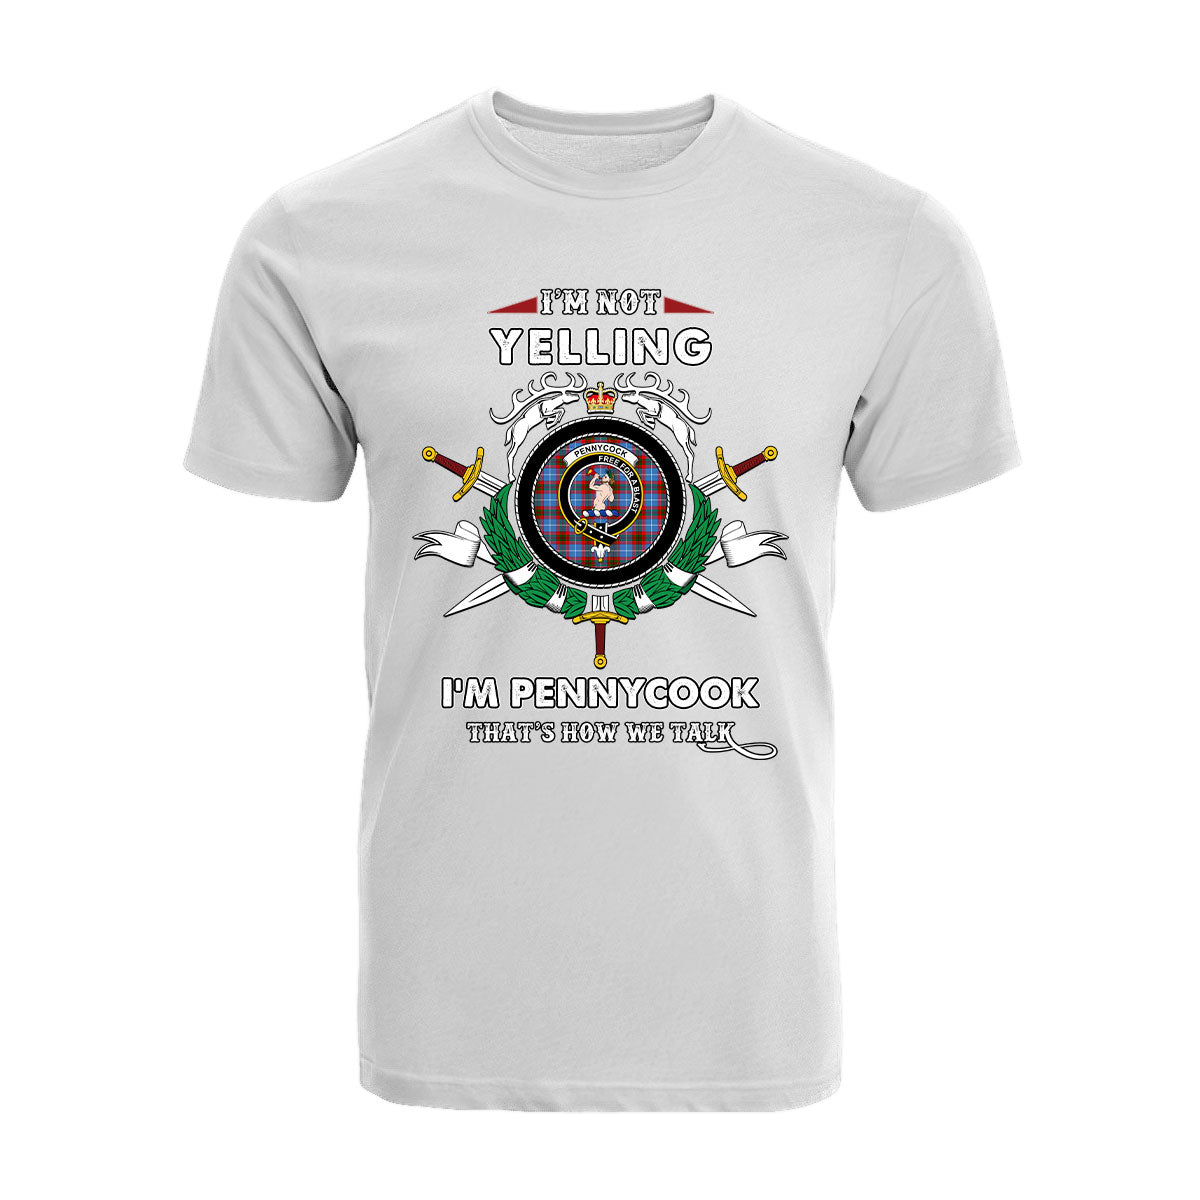 Pennycook Tartan Crest T-shirt - I'm not yelling style